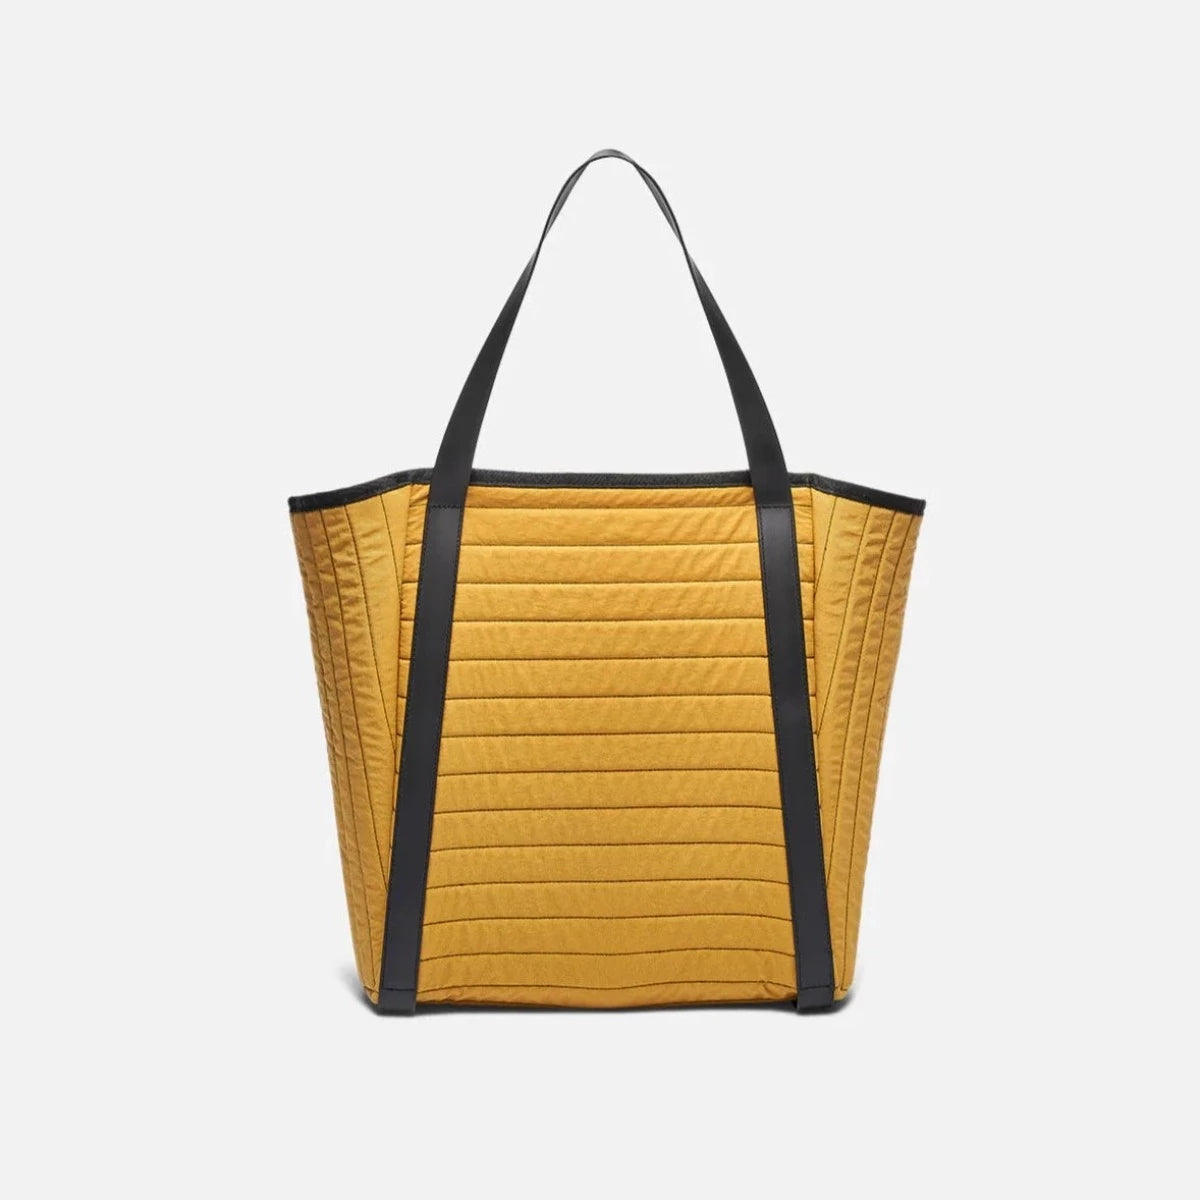 Arris Tote in Goldenrod